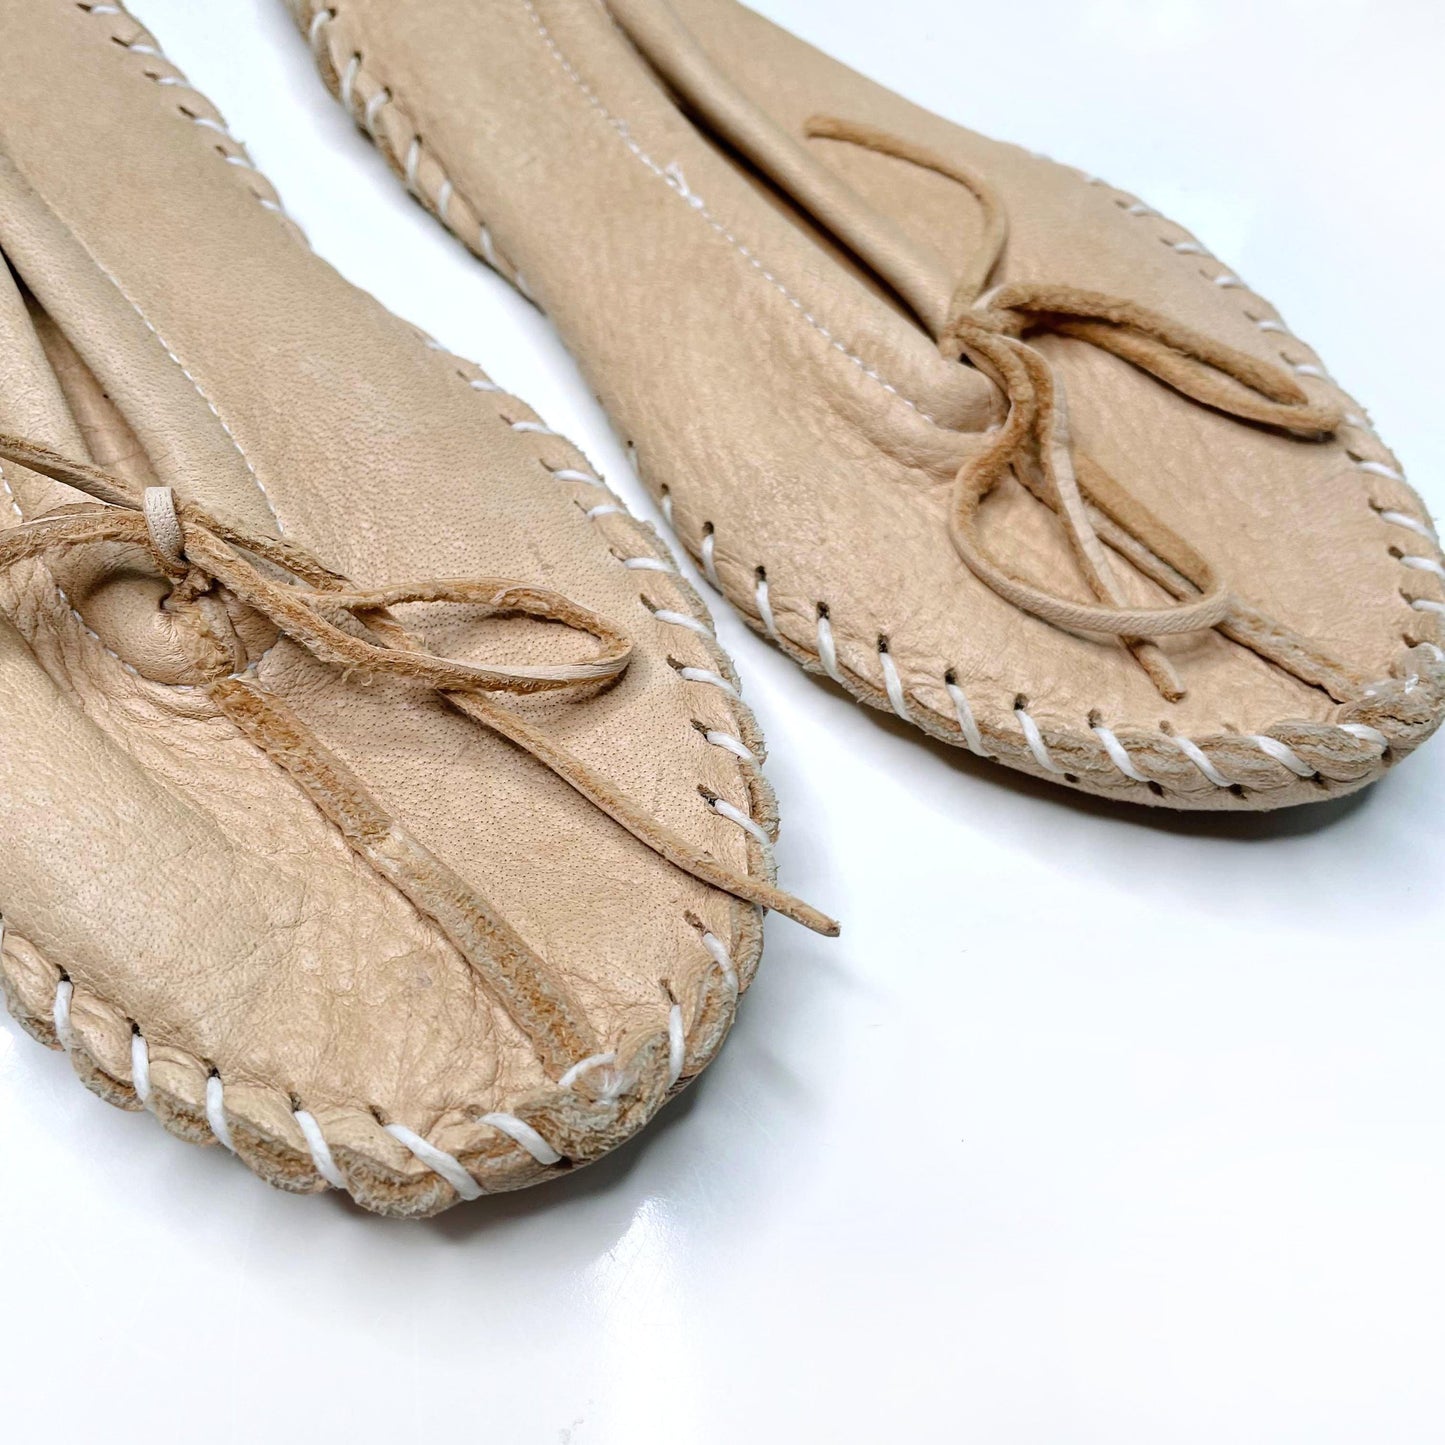 hides in hand leather ballet slipper moccasin - size 7